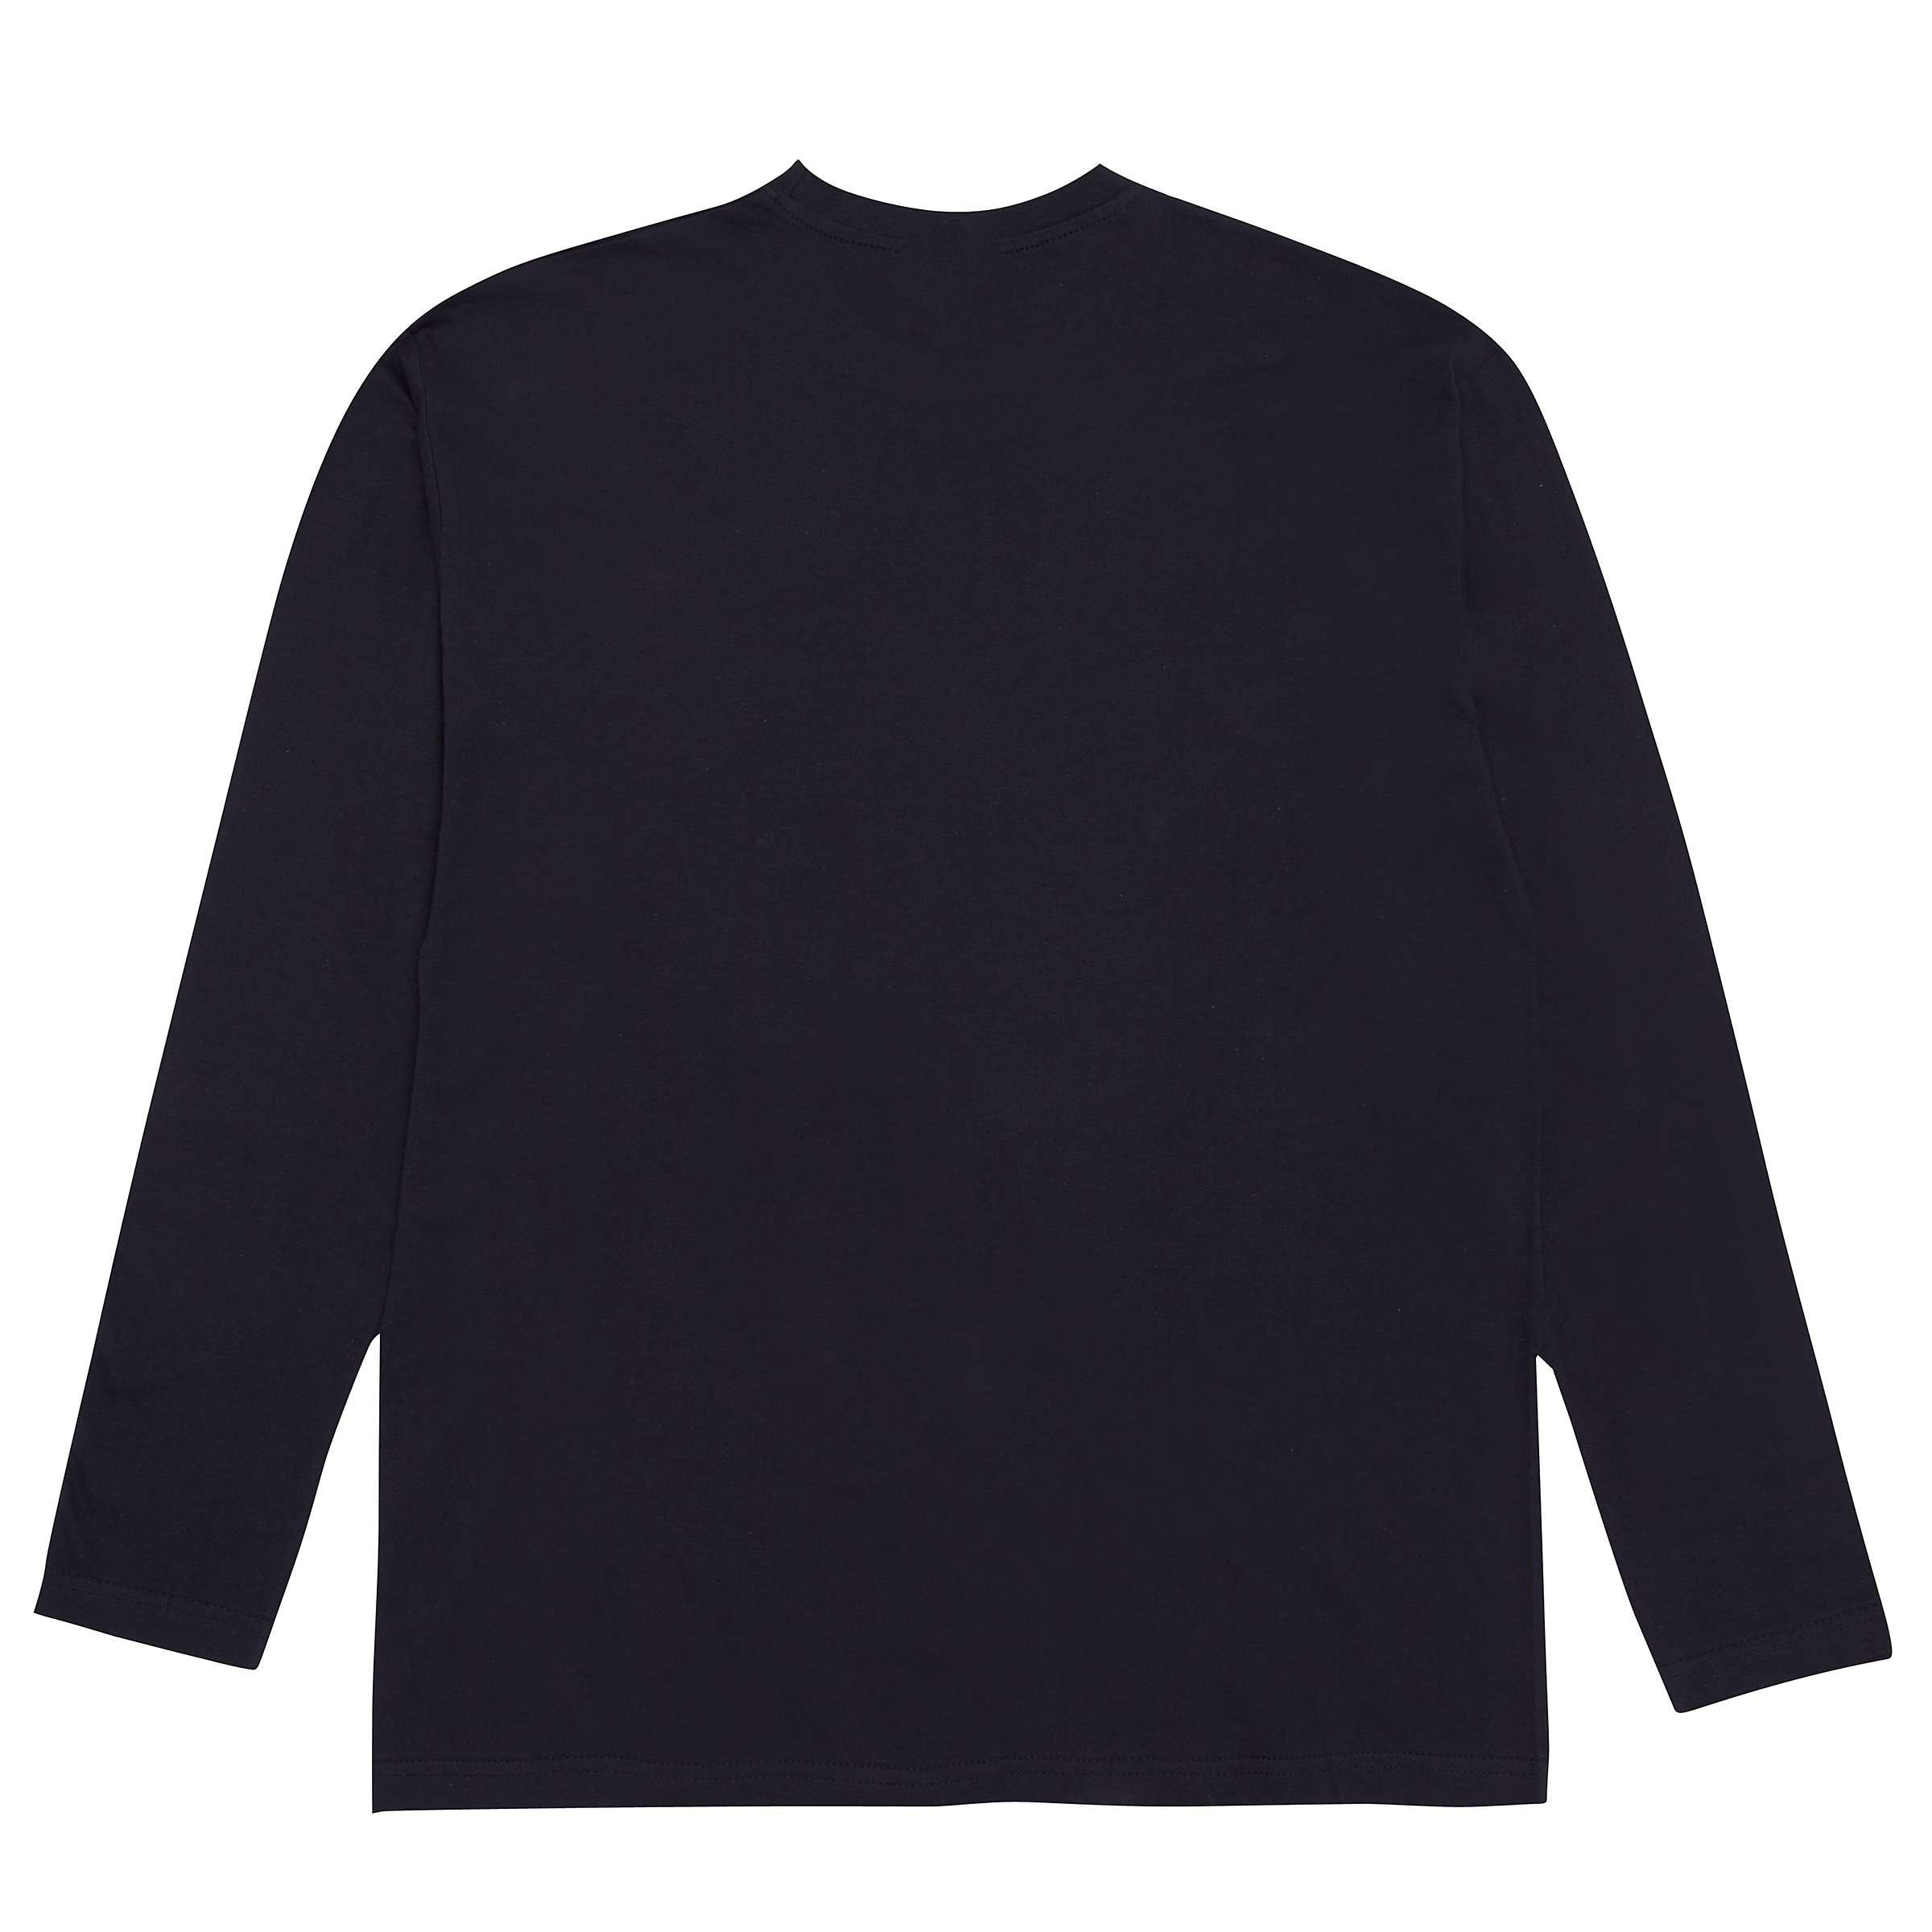 Buy Howell's College Long Sleeve T-Shirt, Navy Online at johnlewis.com